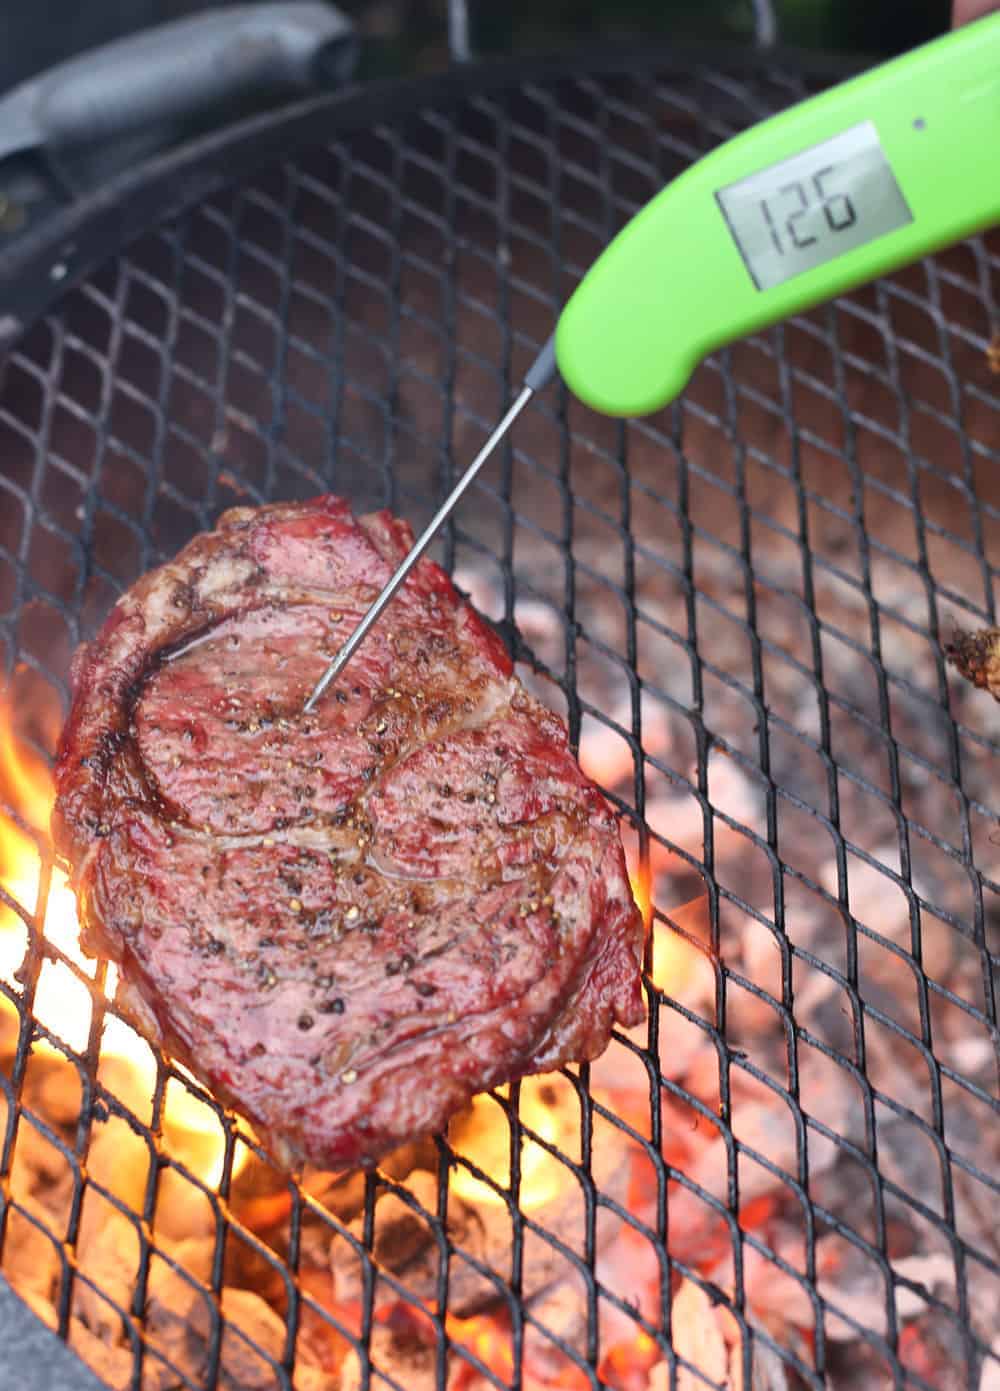 Taking the temperature of beef with a digital thermometer